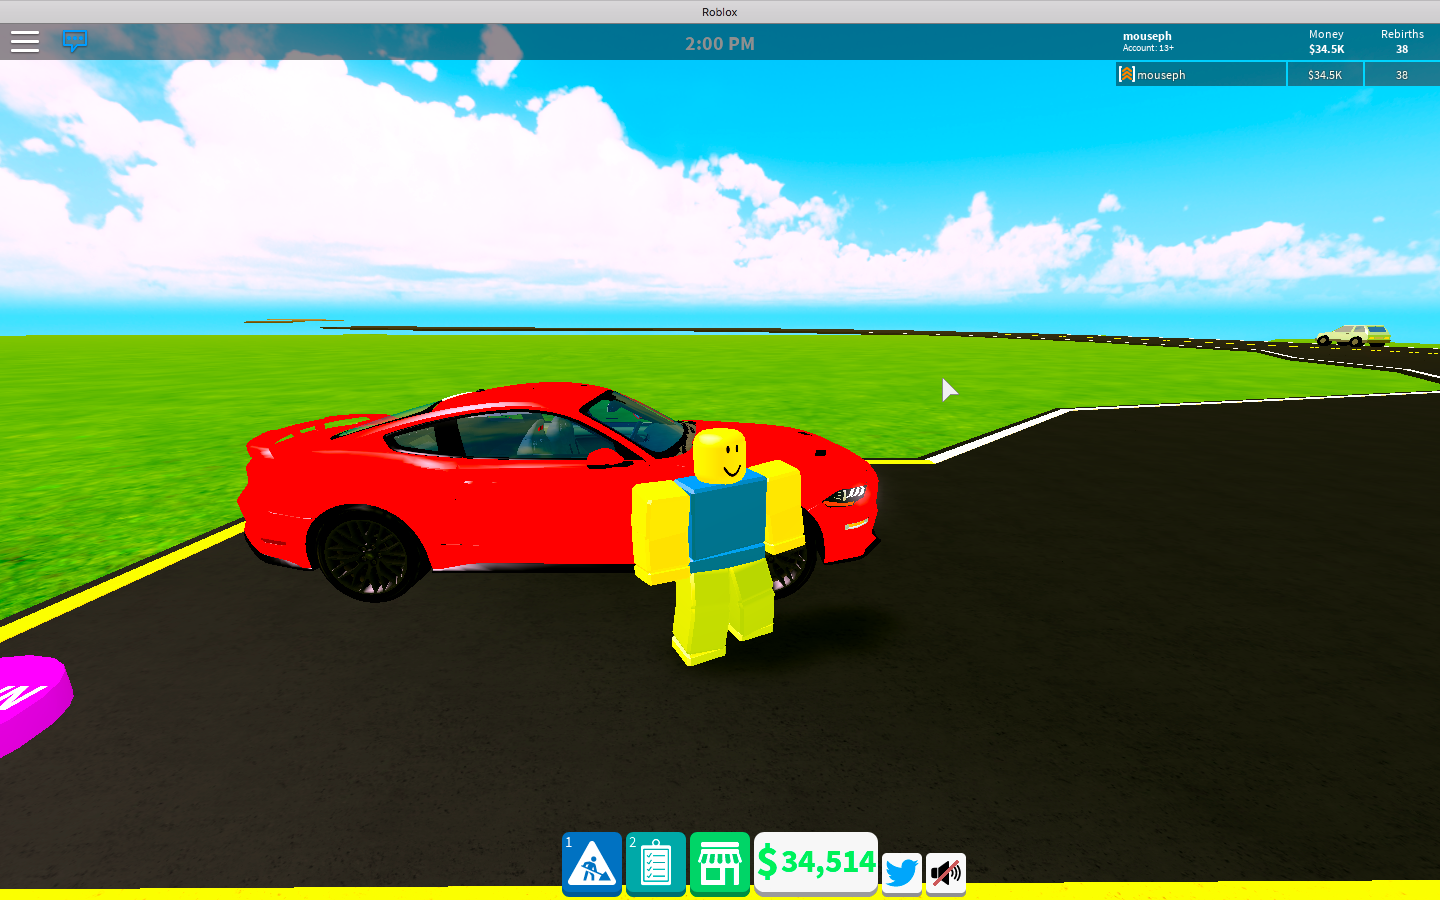 Mustang Roblox Gas Station Simulator Wiki Fandom Powered By Wikia - screen shot 2019 01 09 at 8 40 04 pm